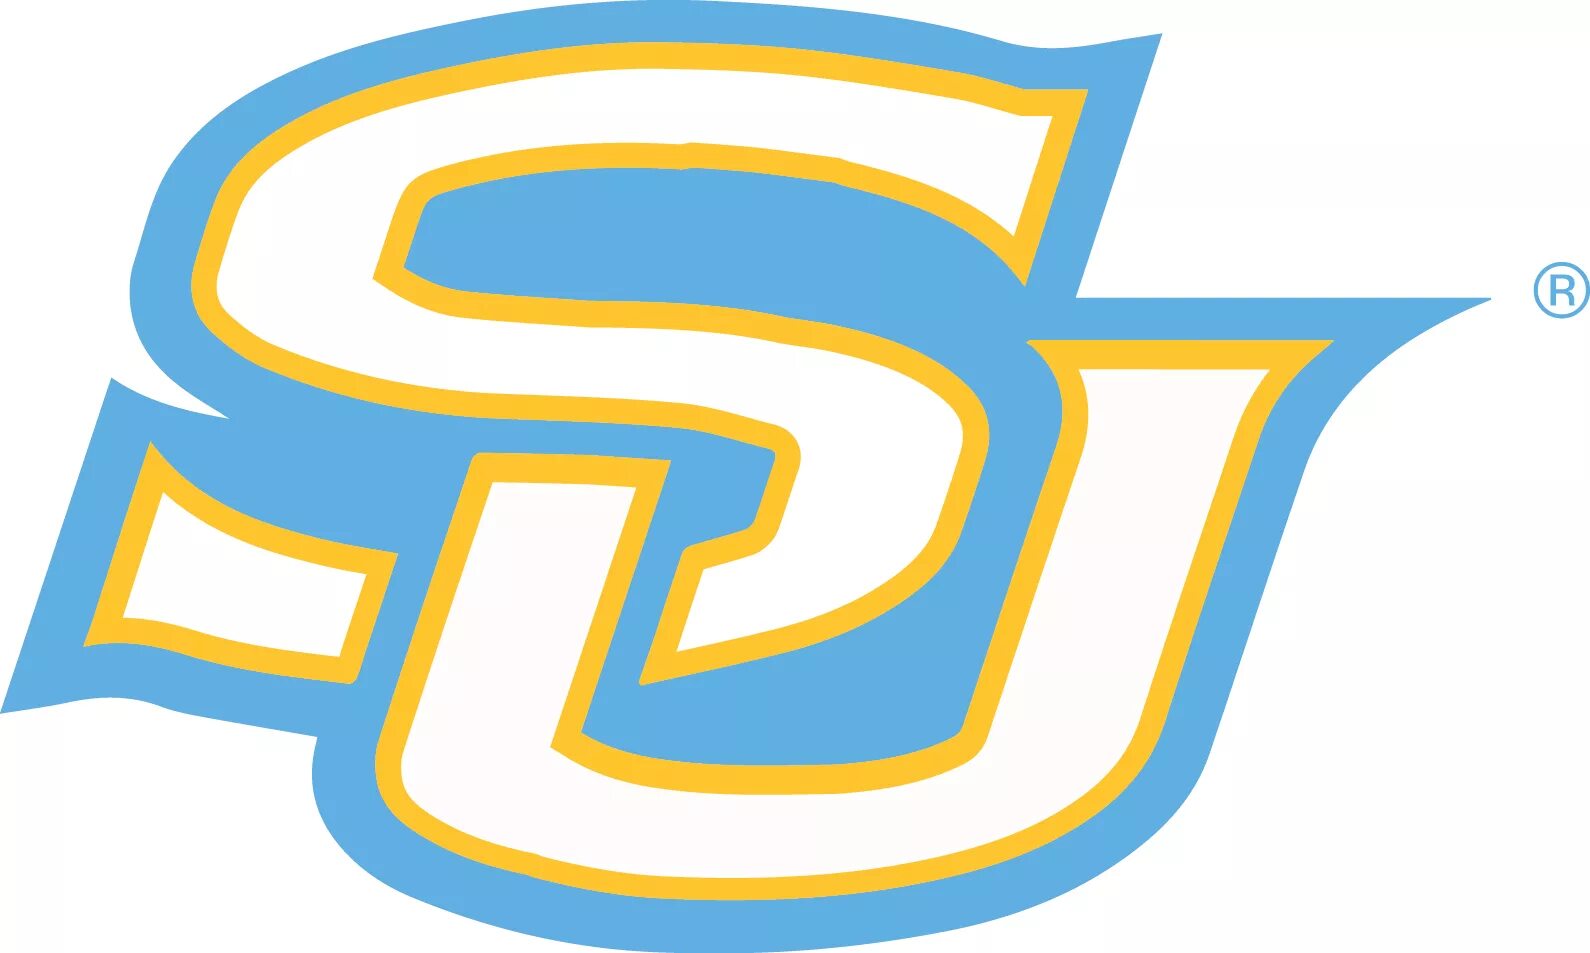 Baton rouge community College. Southern Federal State University logo vector. University of South California.